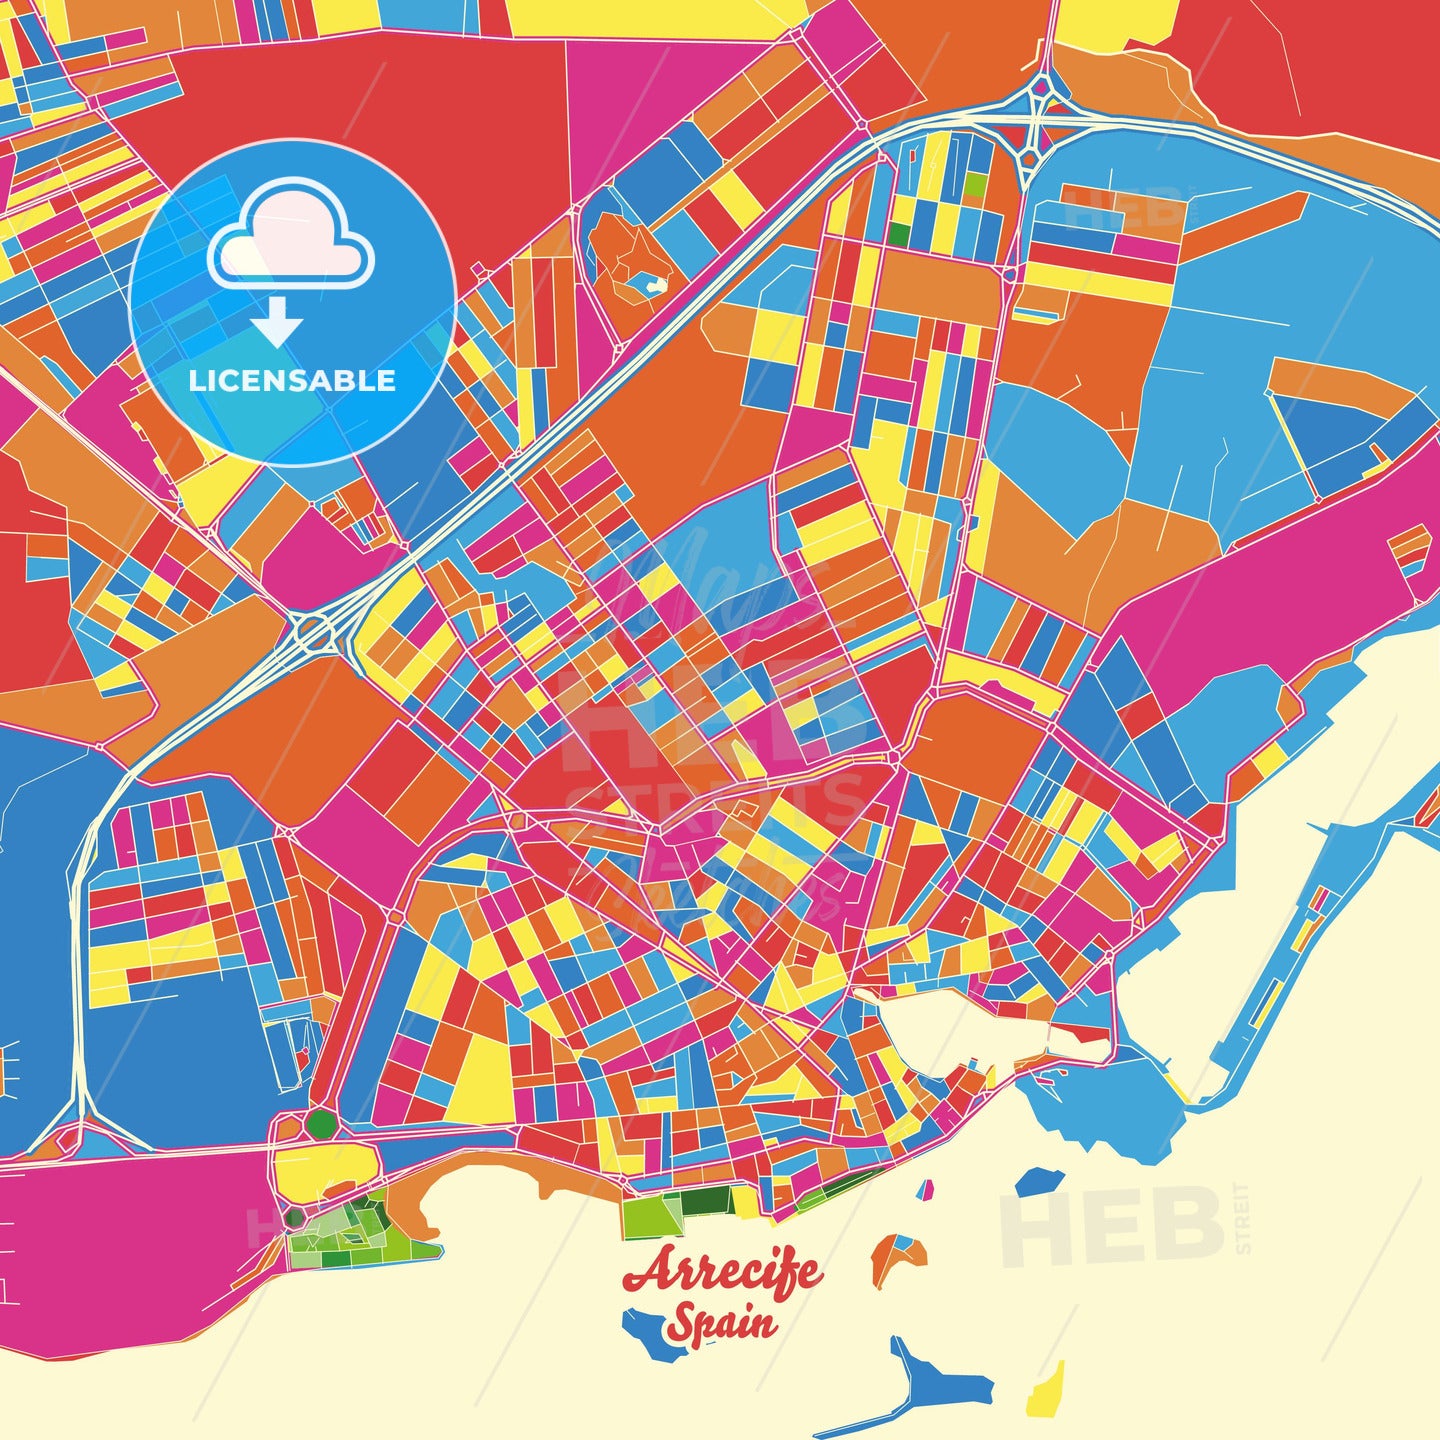 Arrecife, Spain Crazy Colorful Street Map Poster Template - HEBSTREITS Sketches